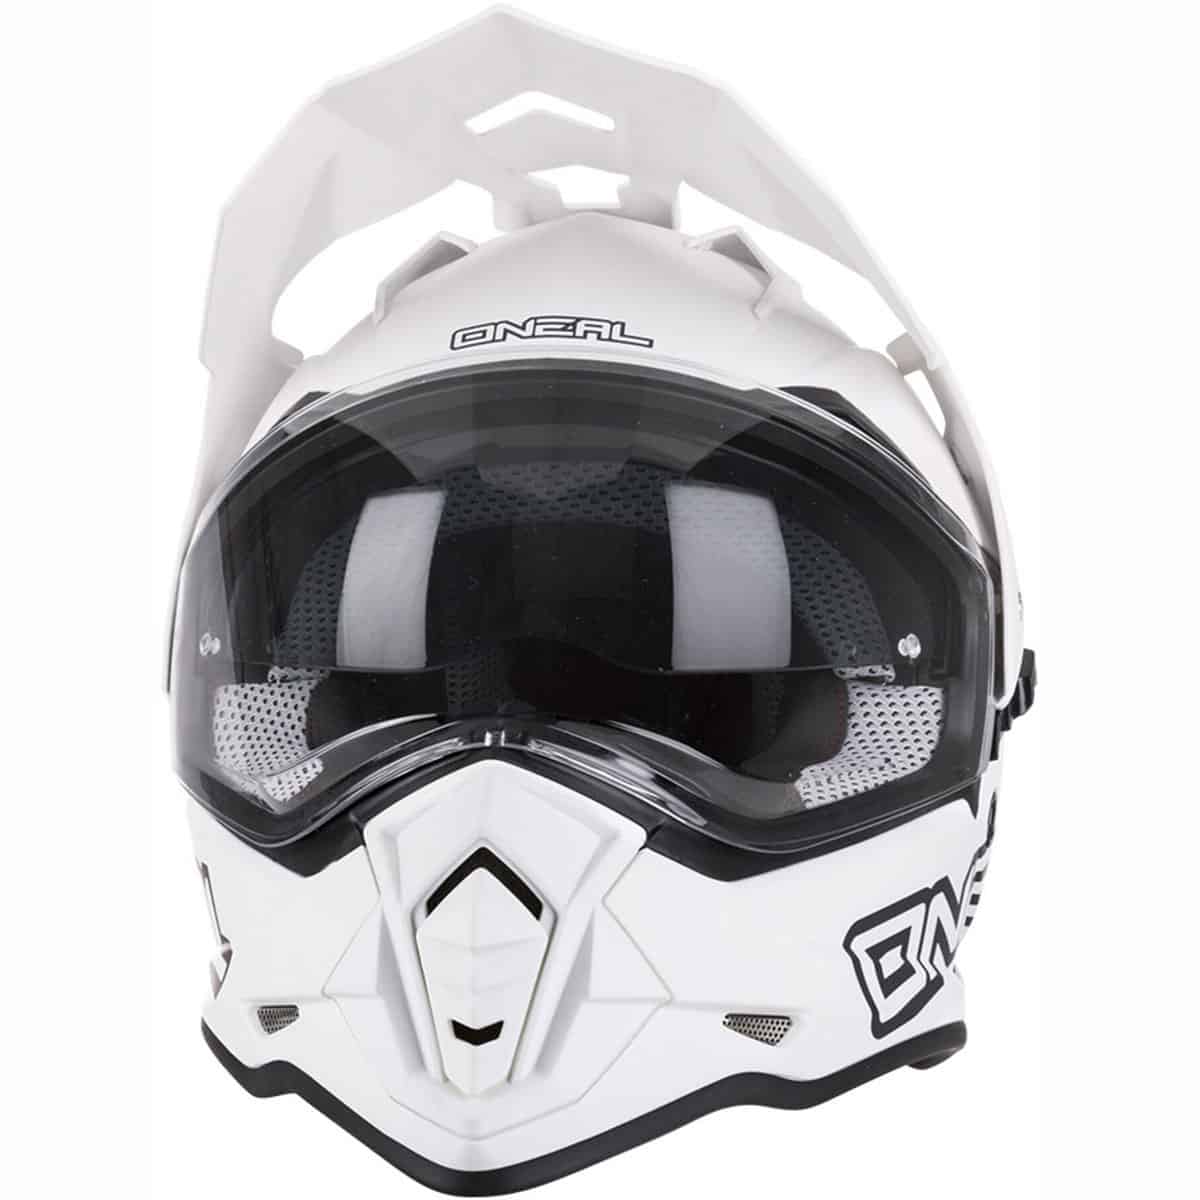 O'Neal Sierra Helmet, excellent value for your money. The inclusion of a pinlock and a sun visor makes this Helmet a great alternative to much more expensive options. 3